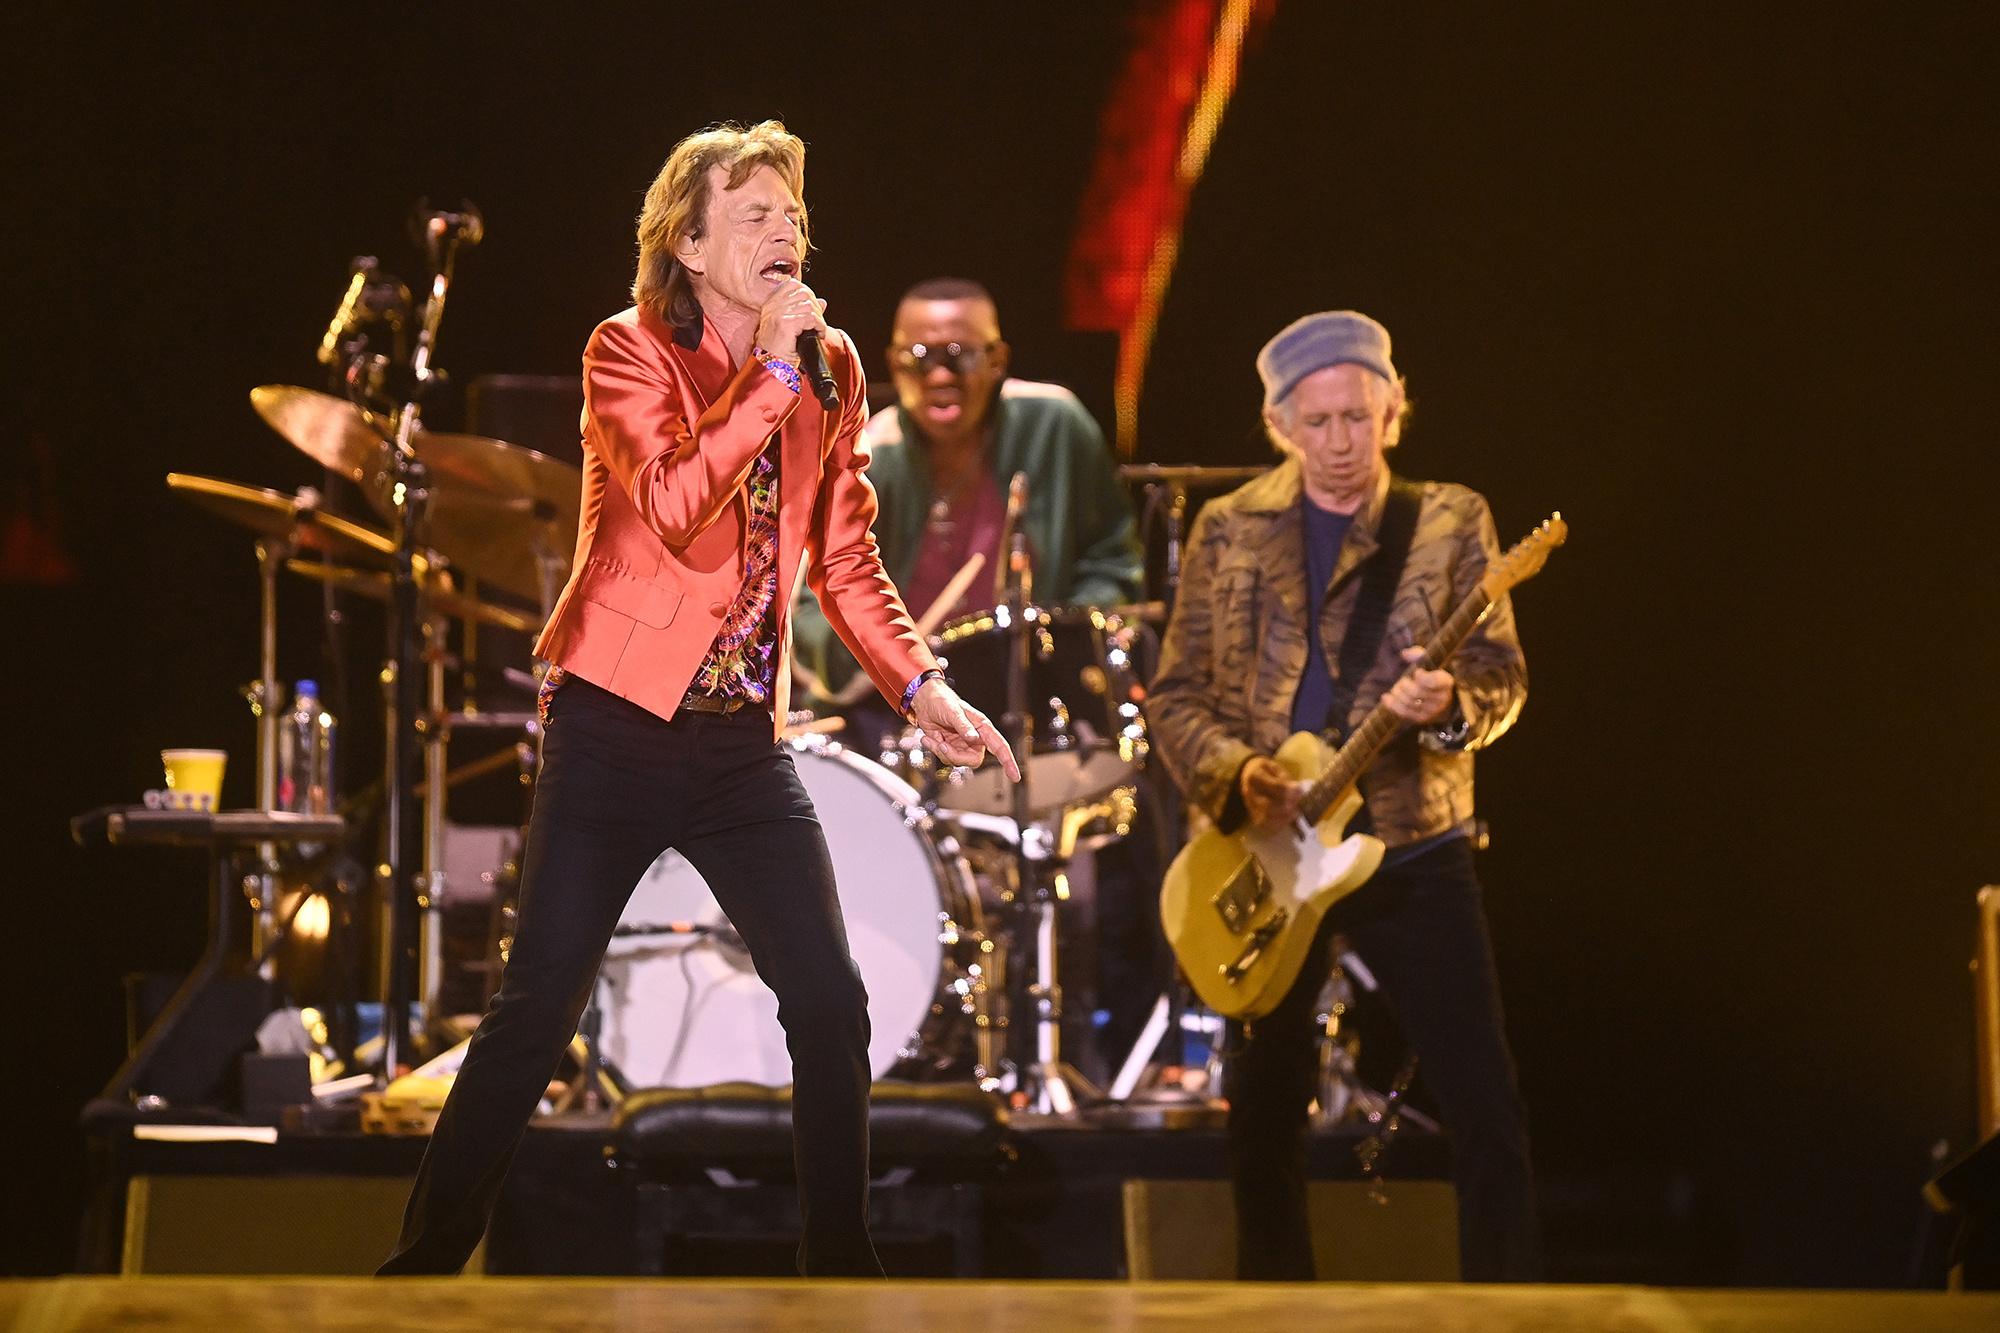 The Rolling Stones, Classic song performance, Tour kickoff, Rock music energy, 2000x1340 HD Desktop